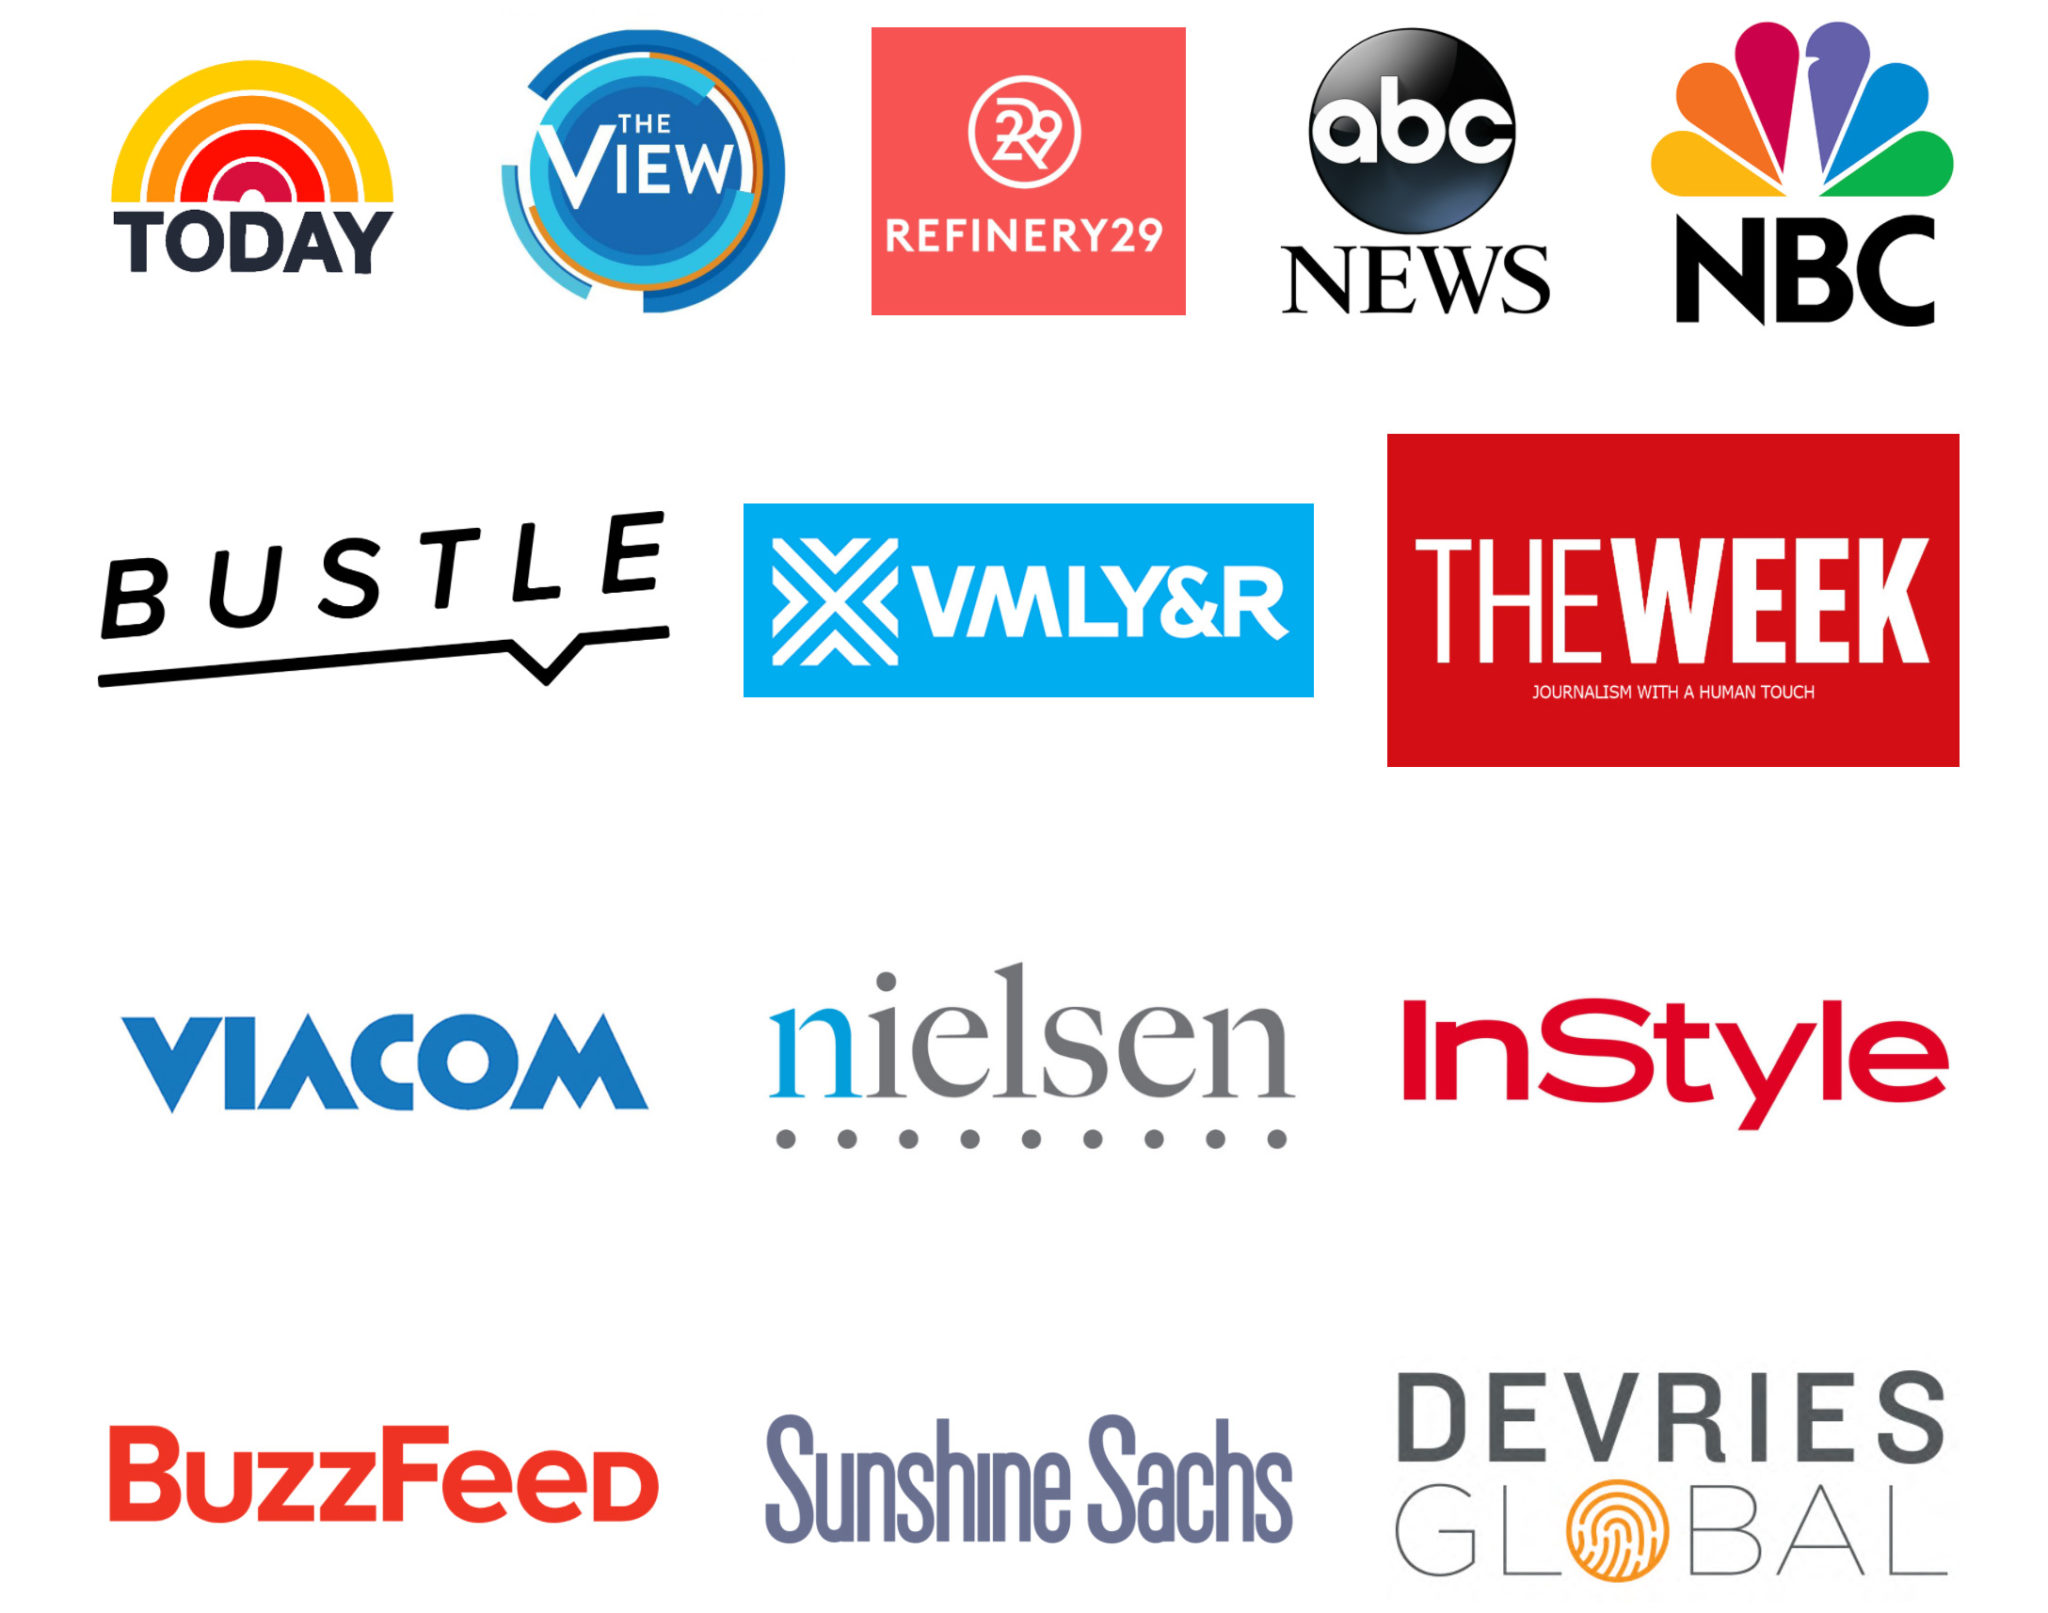 Logos for The Today Show, The View, Refinery 29, ABC News, NBC, Bustle, VMLY&R, The Week, Viacom, Nielsen, InStyle, BuzzFeed, Sunshine Sachs and Devries Global